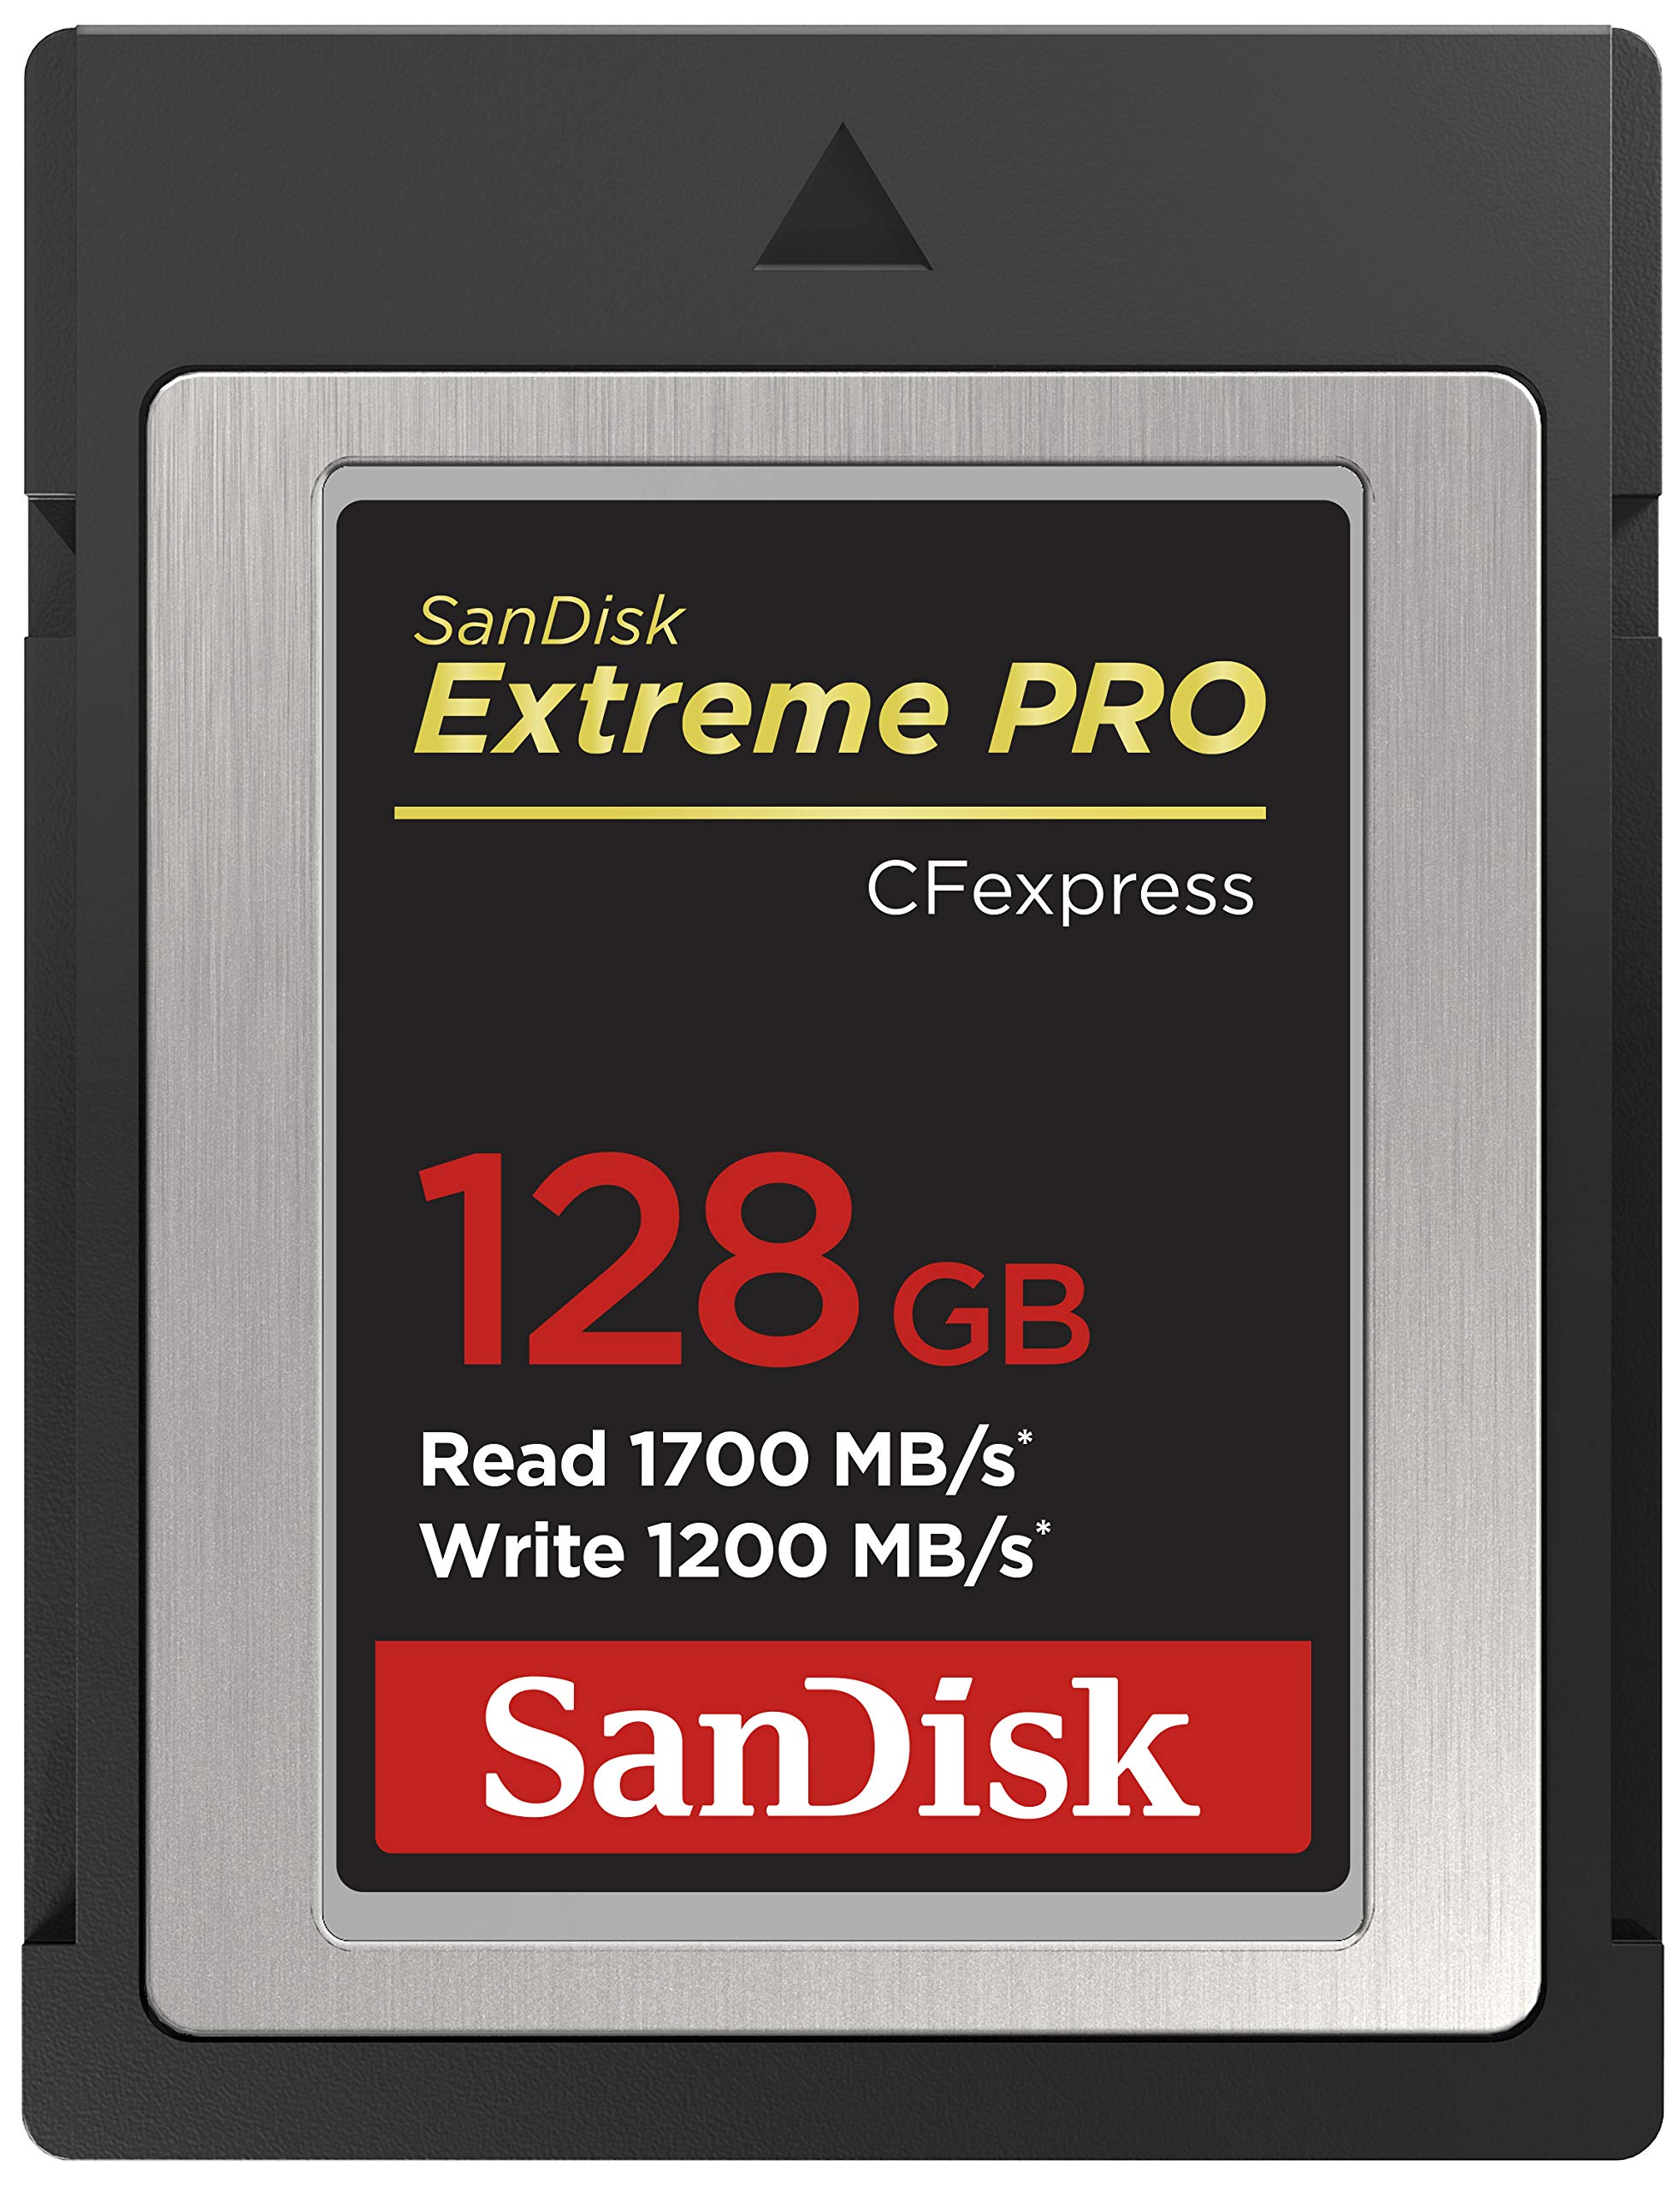 SanDisk 128GB Extreme PRO CFexpress Card Type B - SDCFE-128G-GN4NN - $69.99 + F/S - Amazon